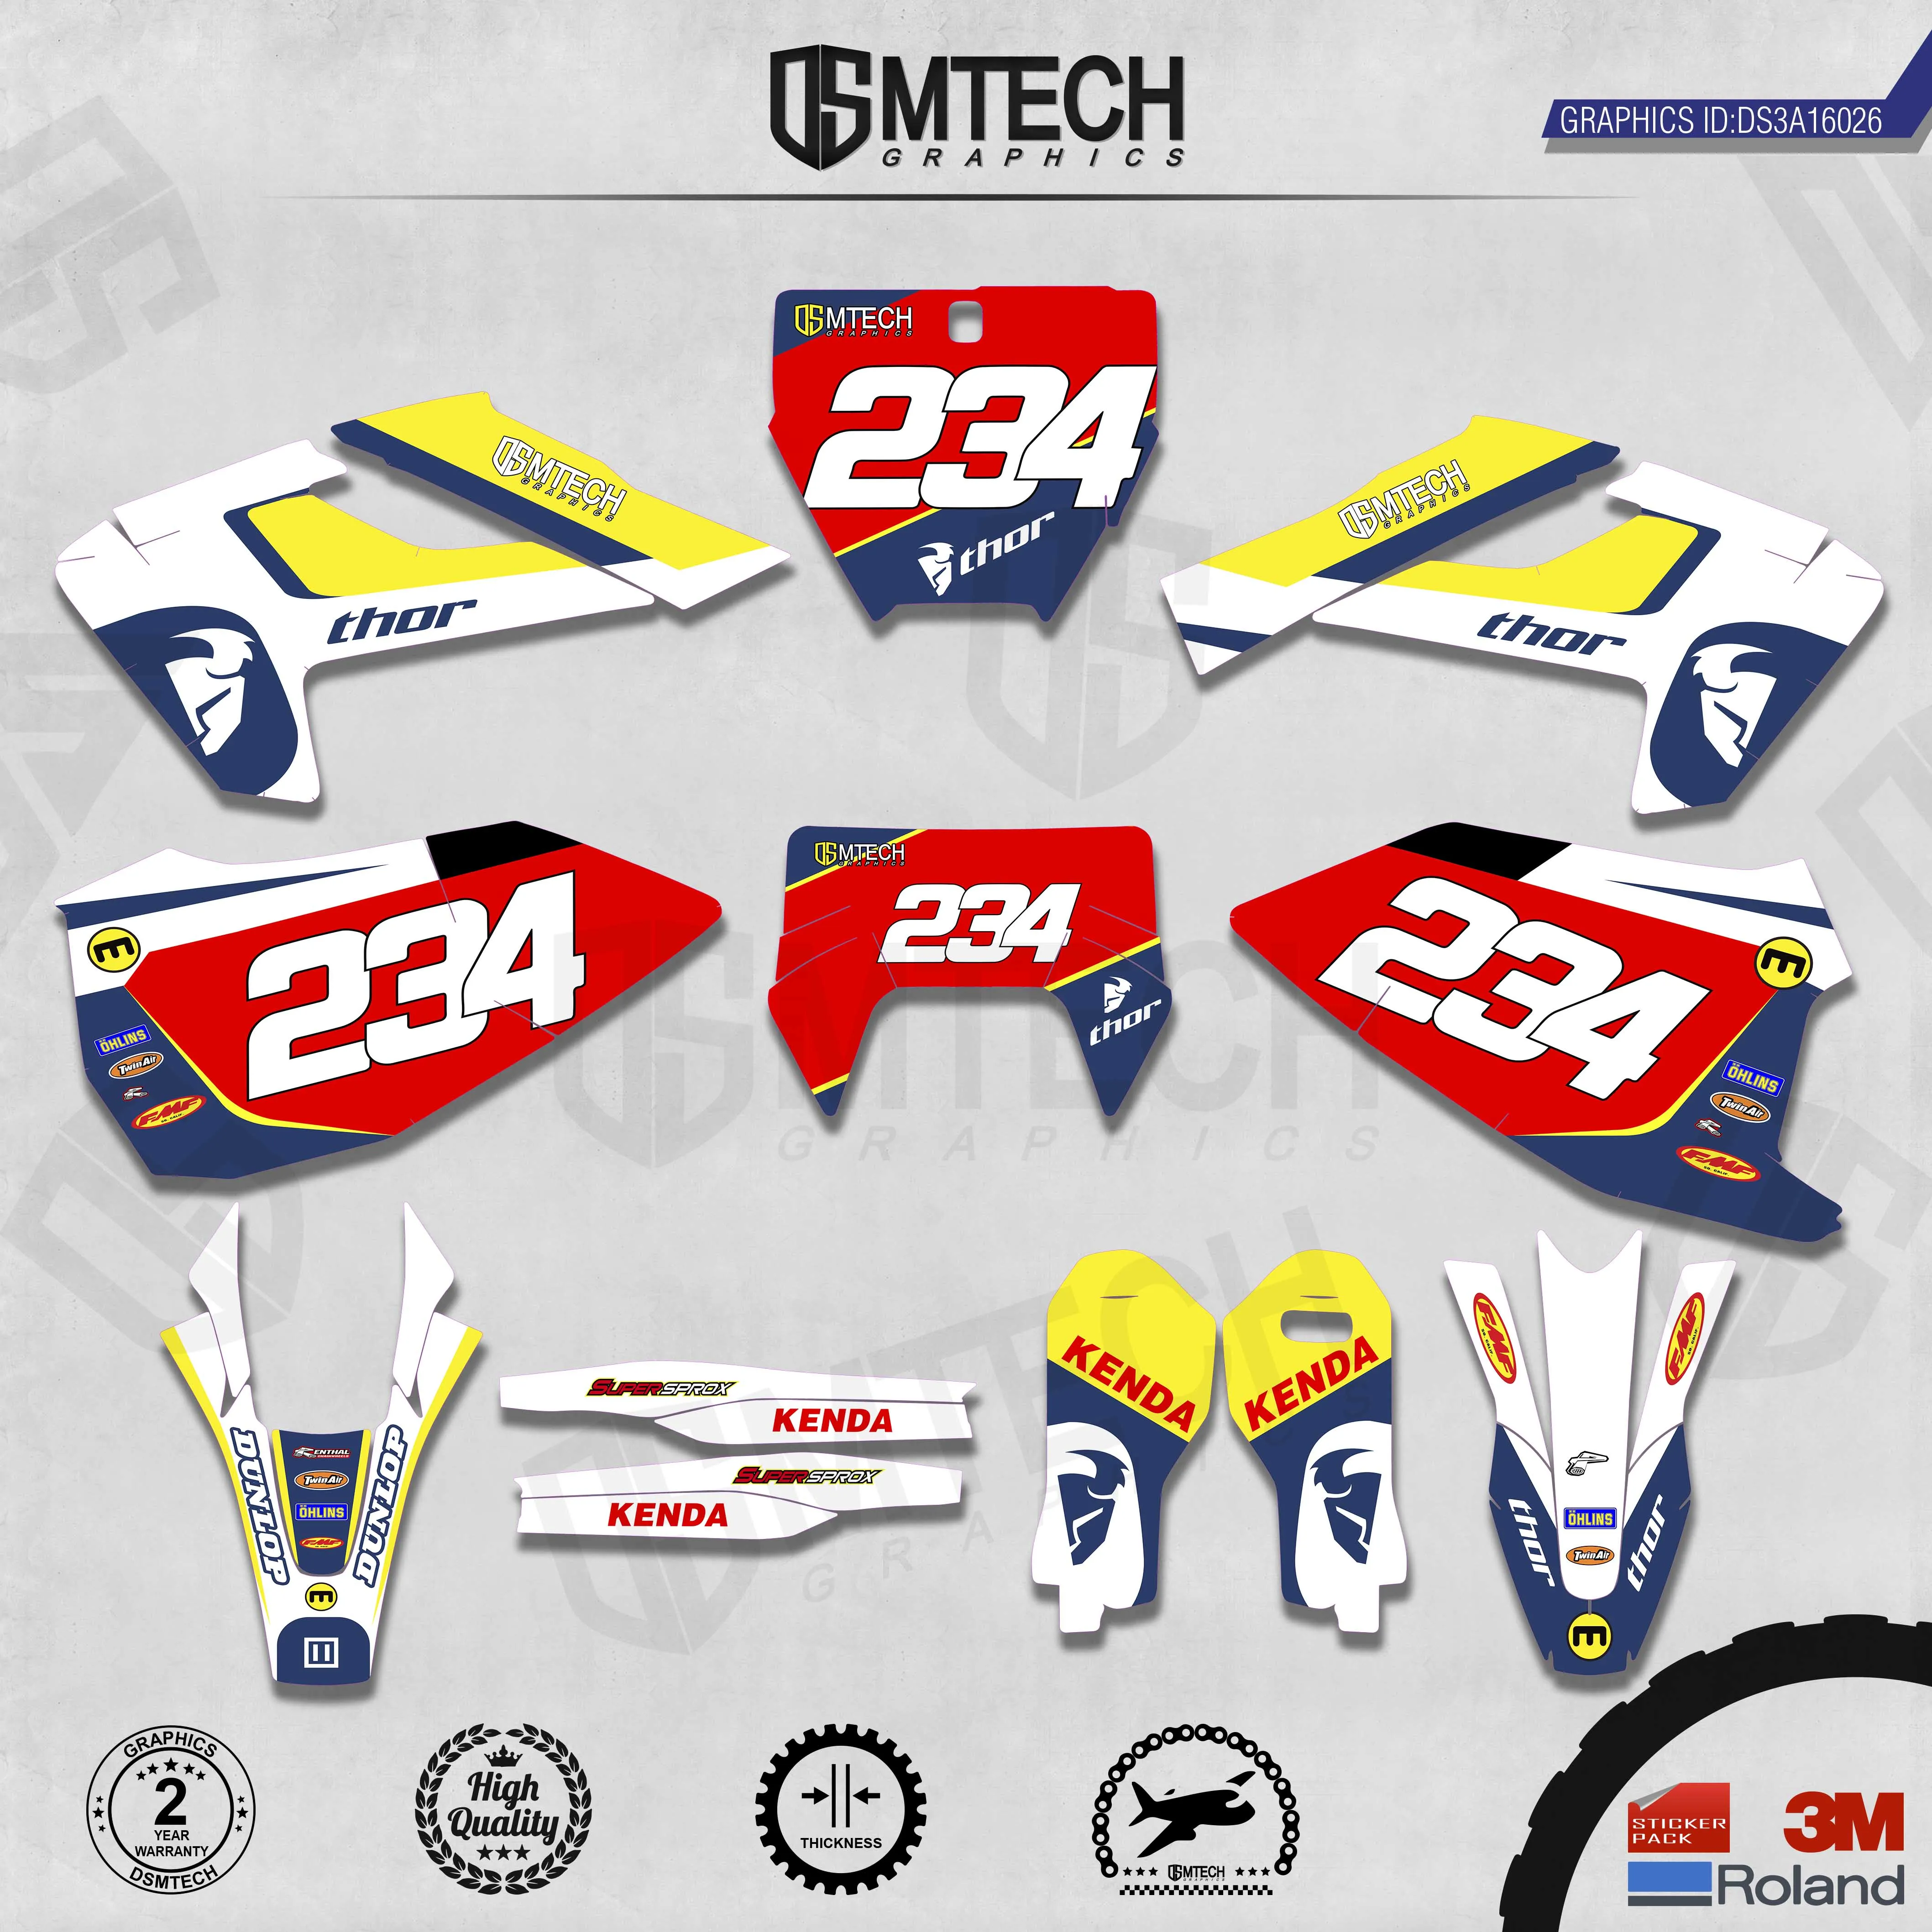 DSMTECH Customized Team Graphics Backgrounds Decals 3M Custom Stickers For TC FC TX FX FS 2016-2018  TE FE 2017-2019  026